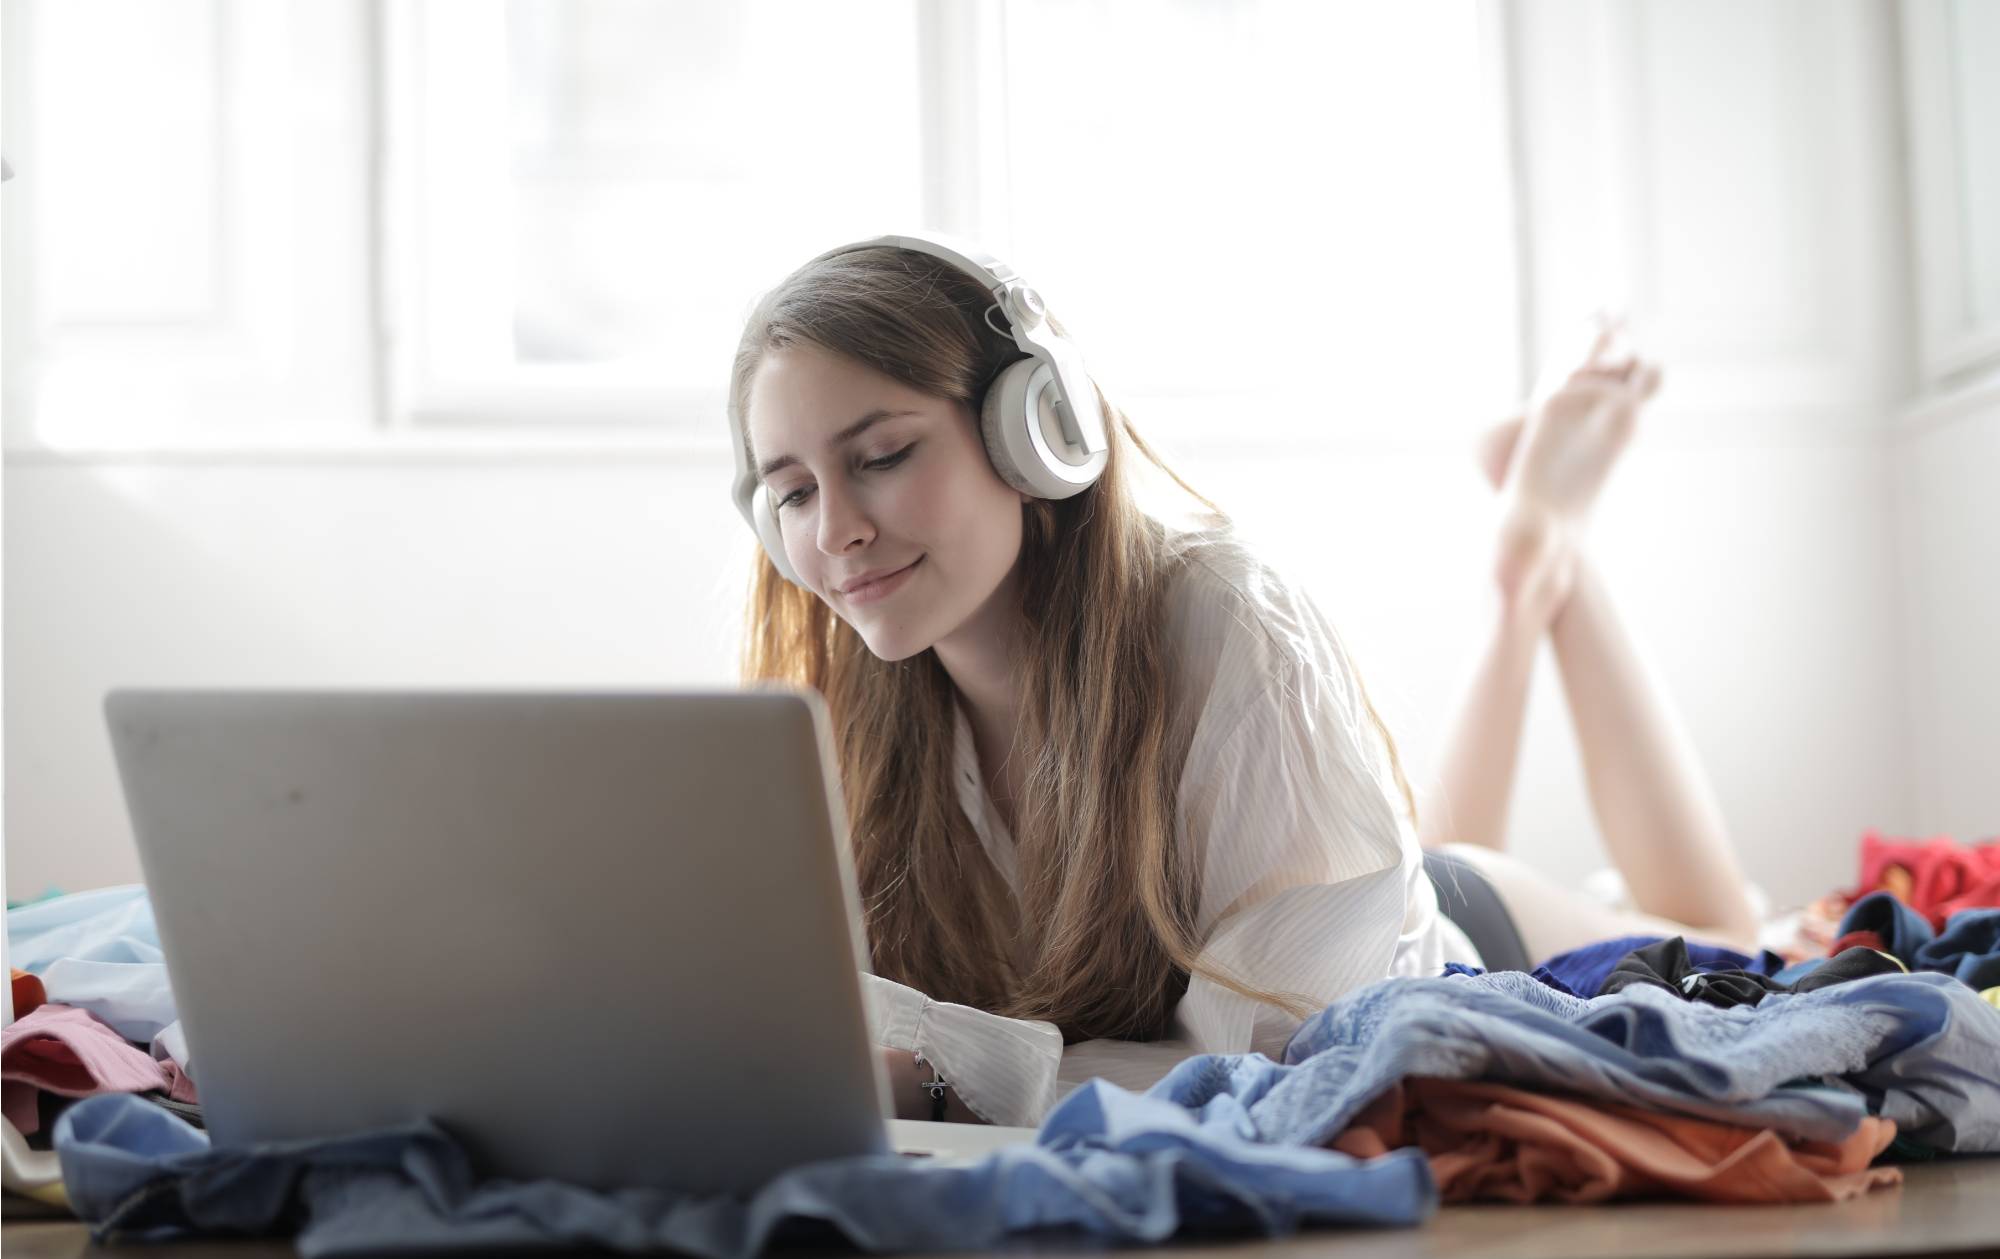 woman listening to audio via headphones while on bed